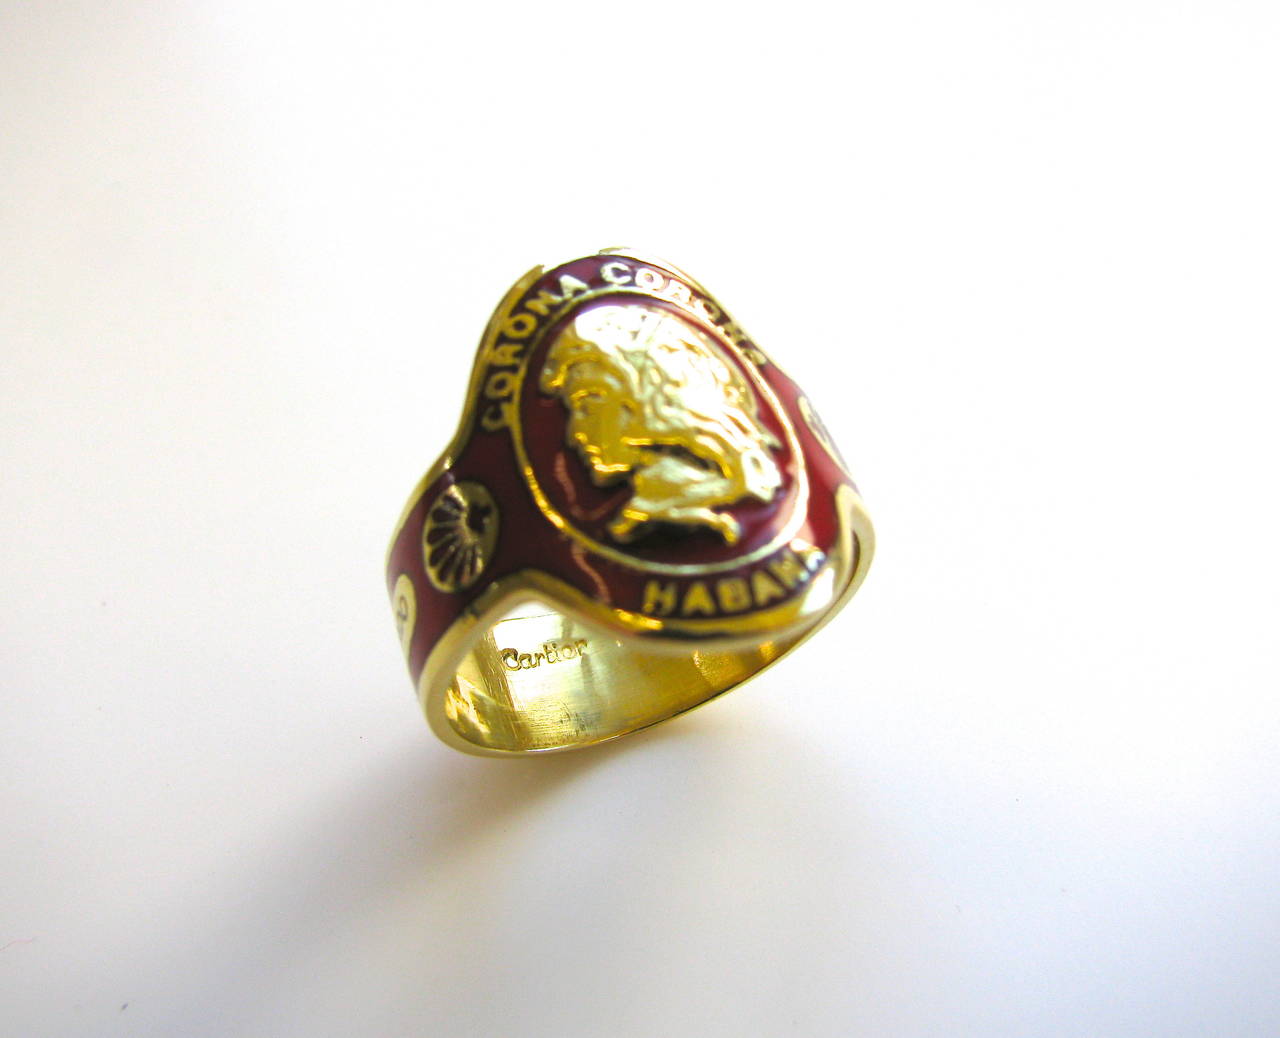 Cartier Enamel Gold Cigar Band Ring Kimberly Klosterman Jewelry